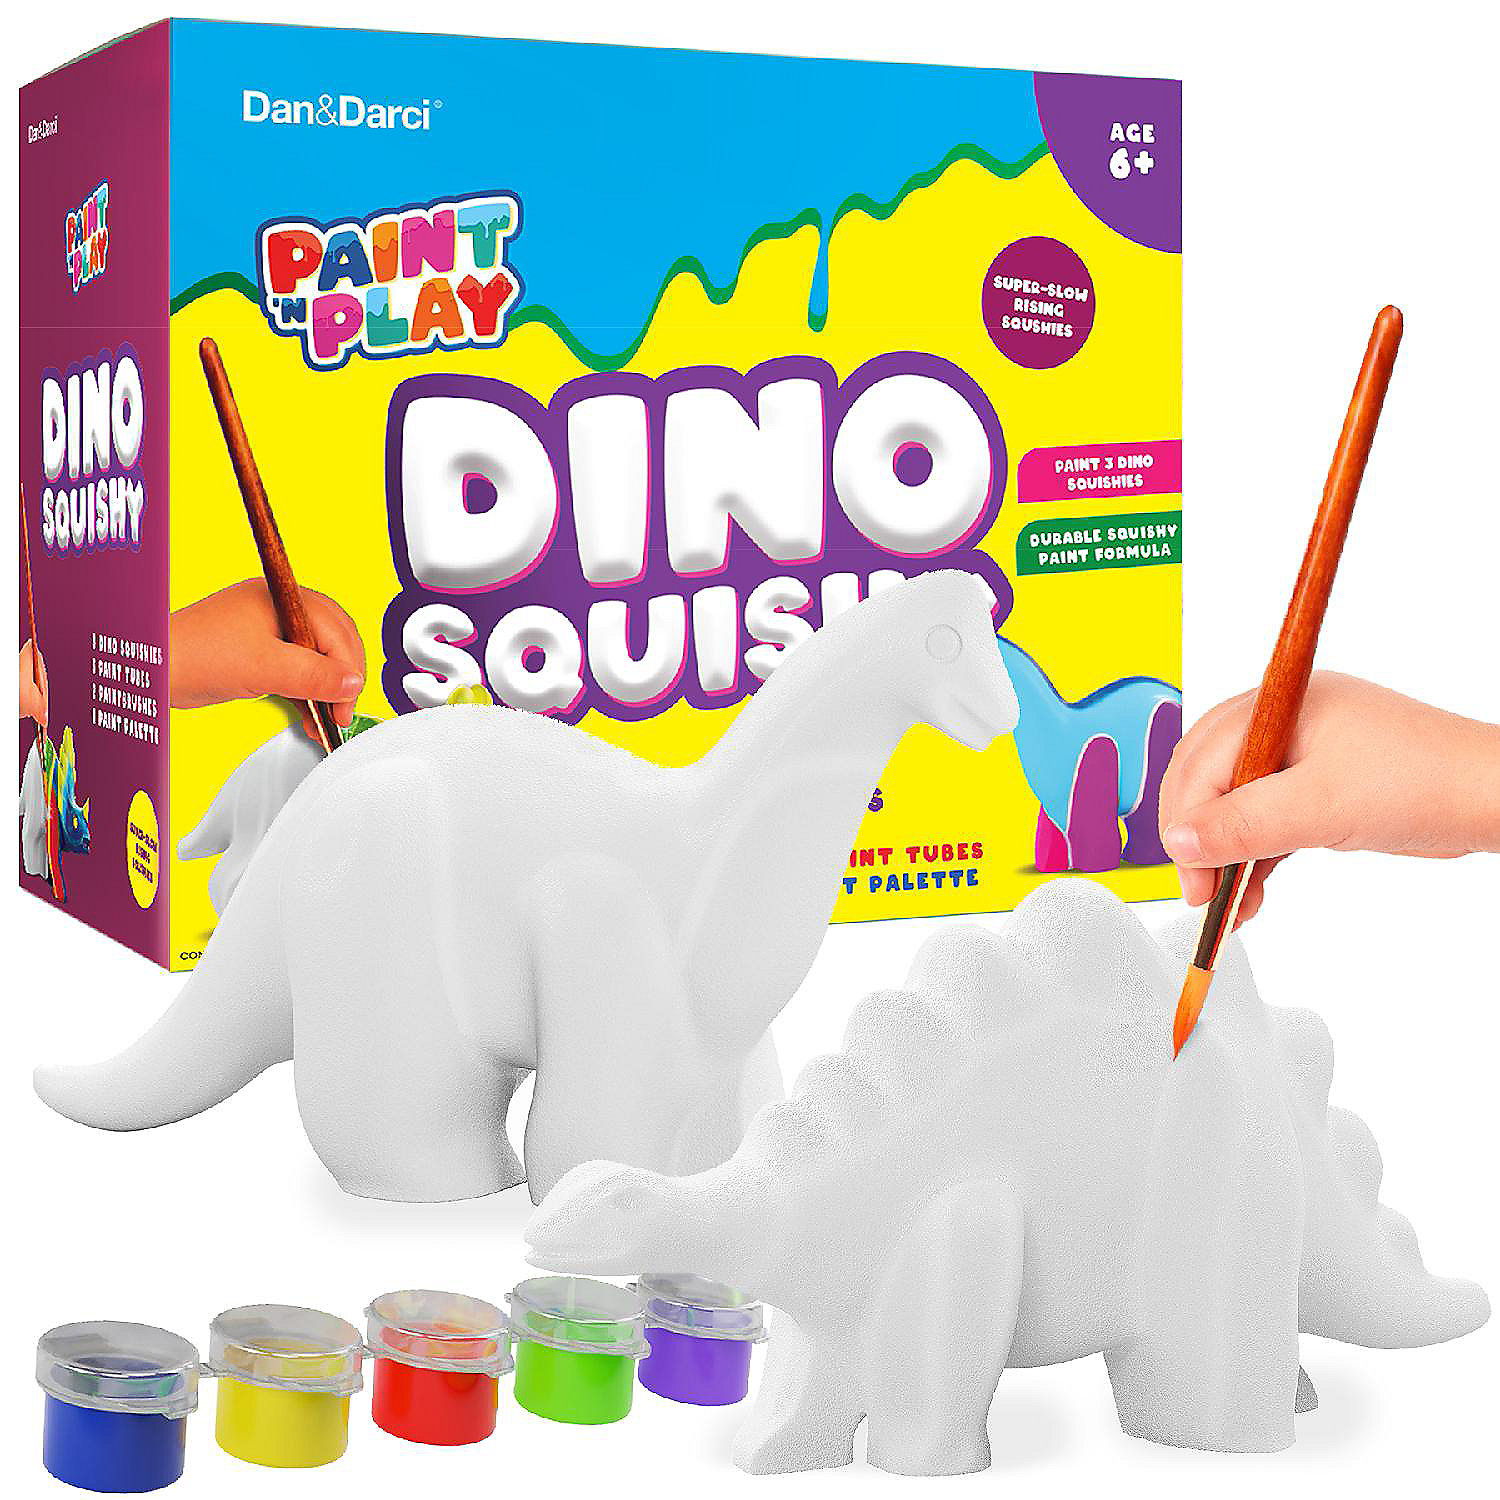 Dan&Darci - Paint Large Dino Squishies - Paint a Squishy Kit Make Your Own with Puffy